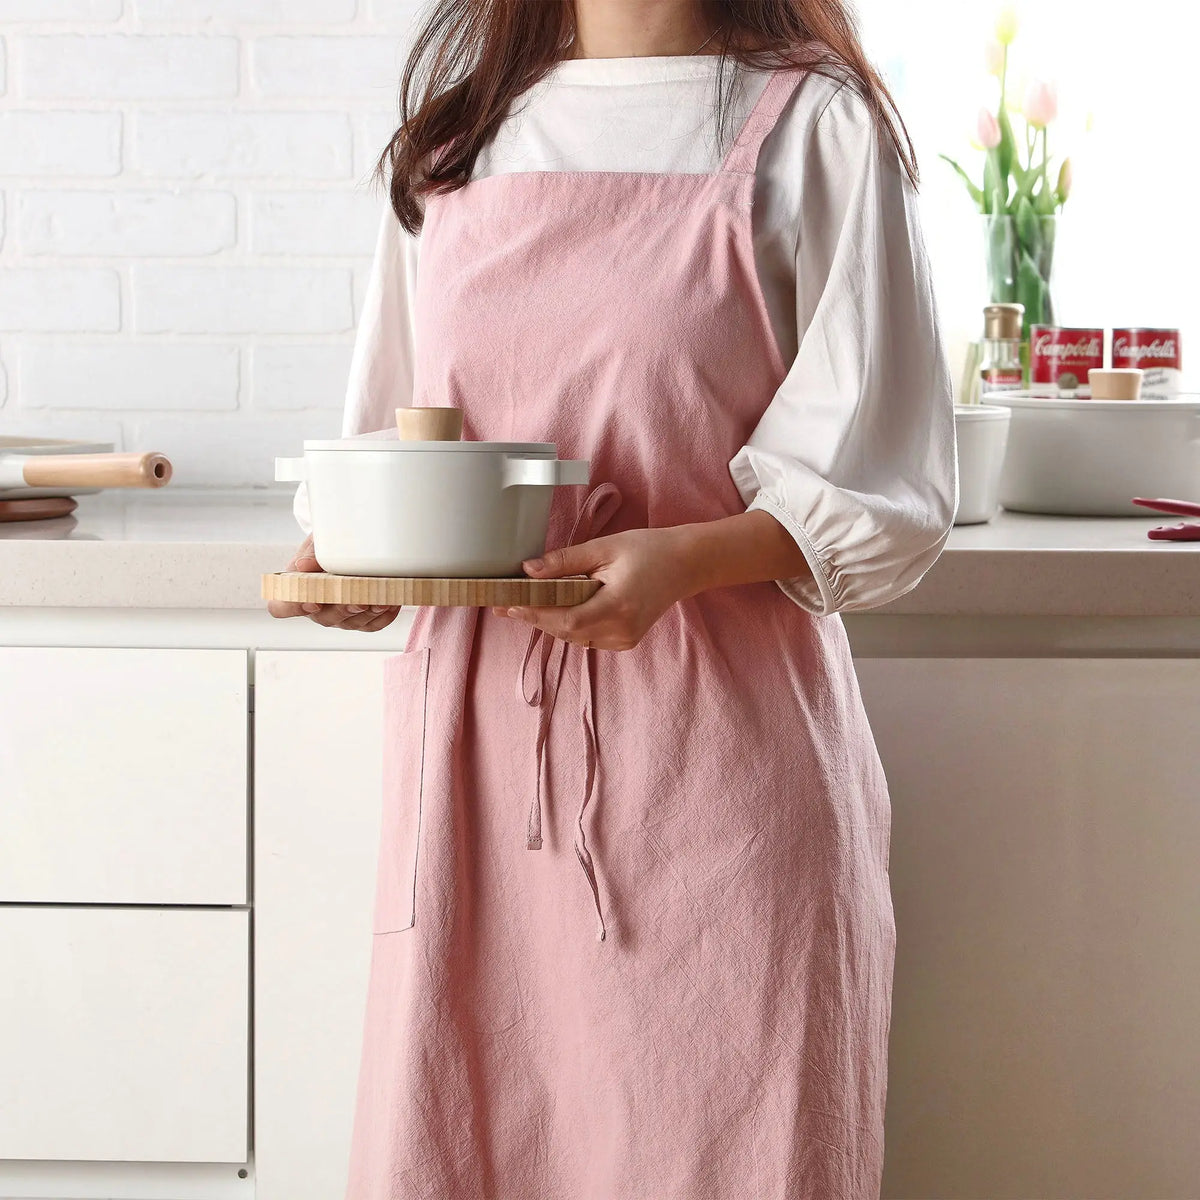 Neoflam Fika Apron made from 100% Cotton Peach Pink